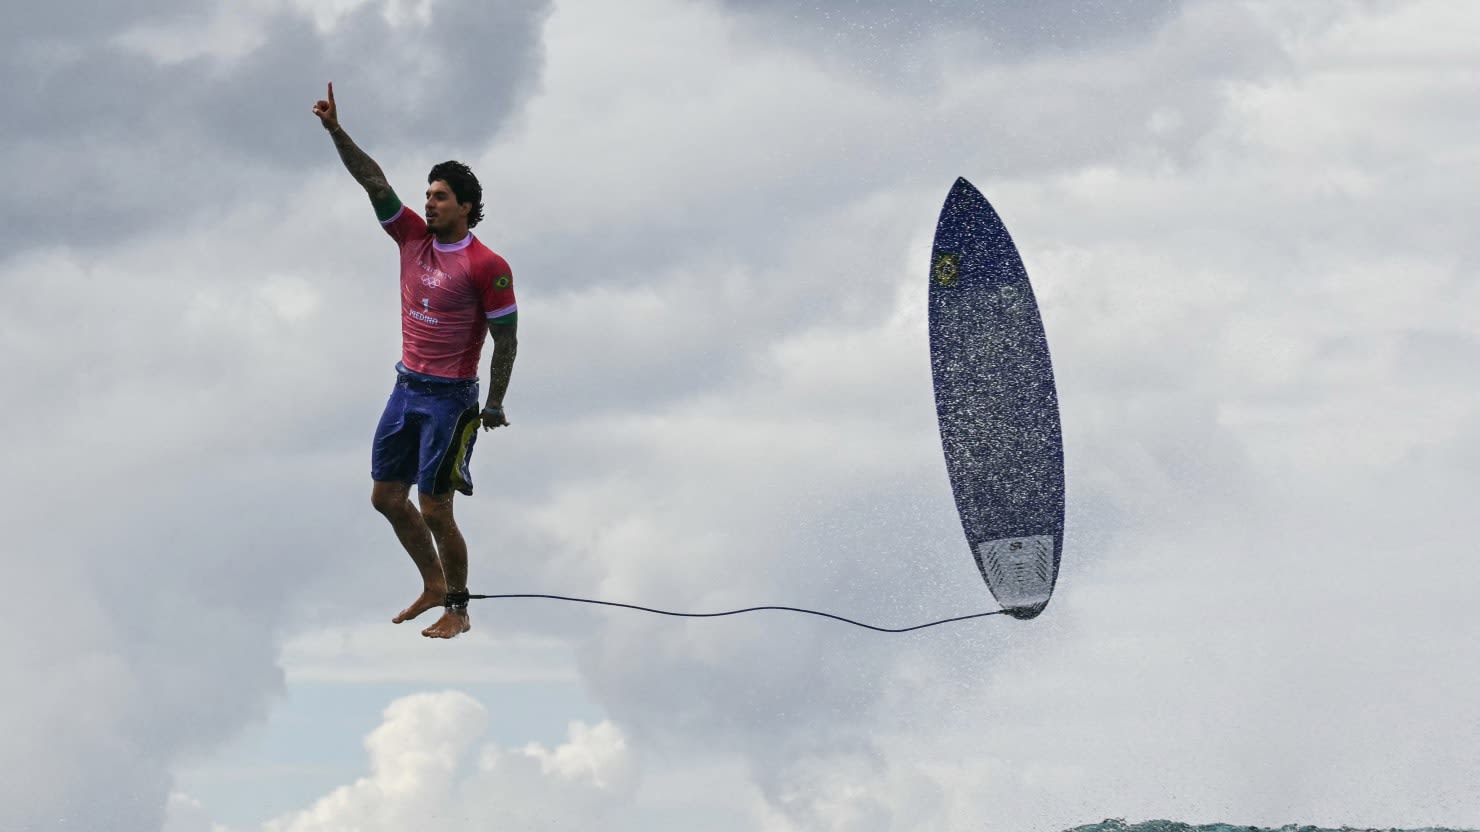 This Photo of Surfer Gabriel Medina Is the Picture of the Paris Olympics